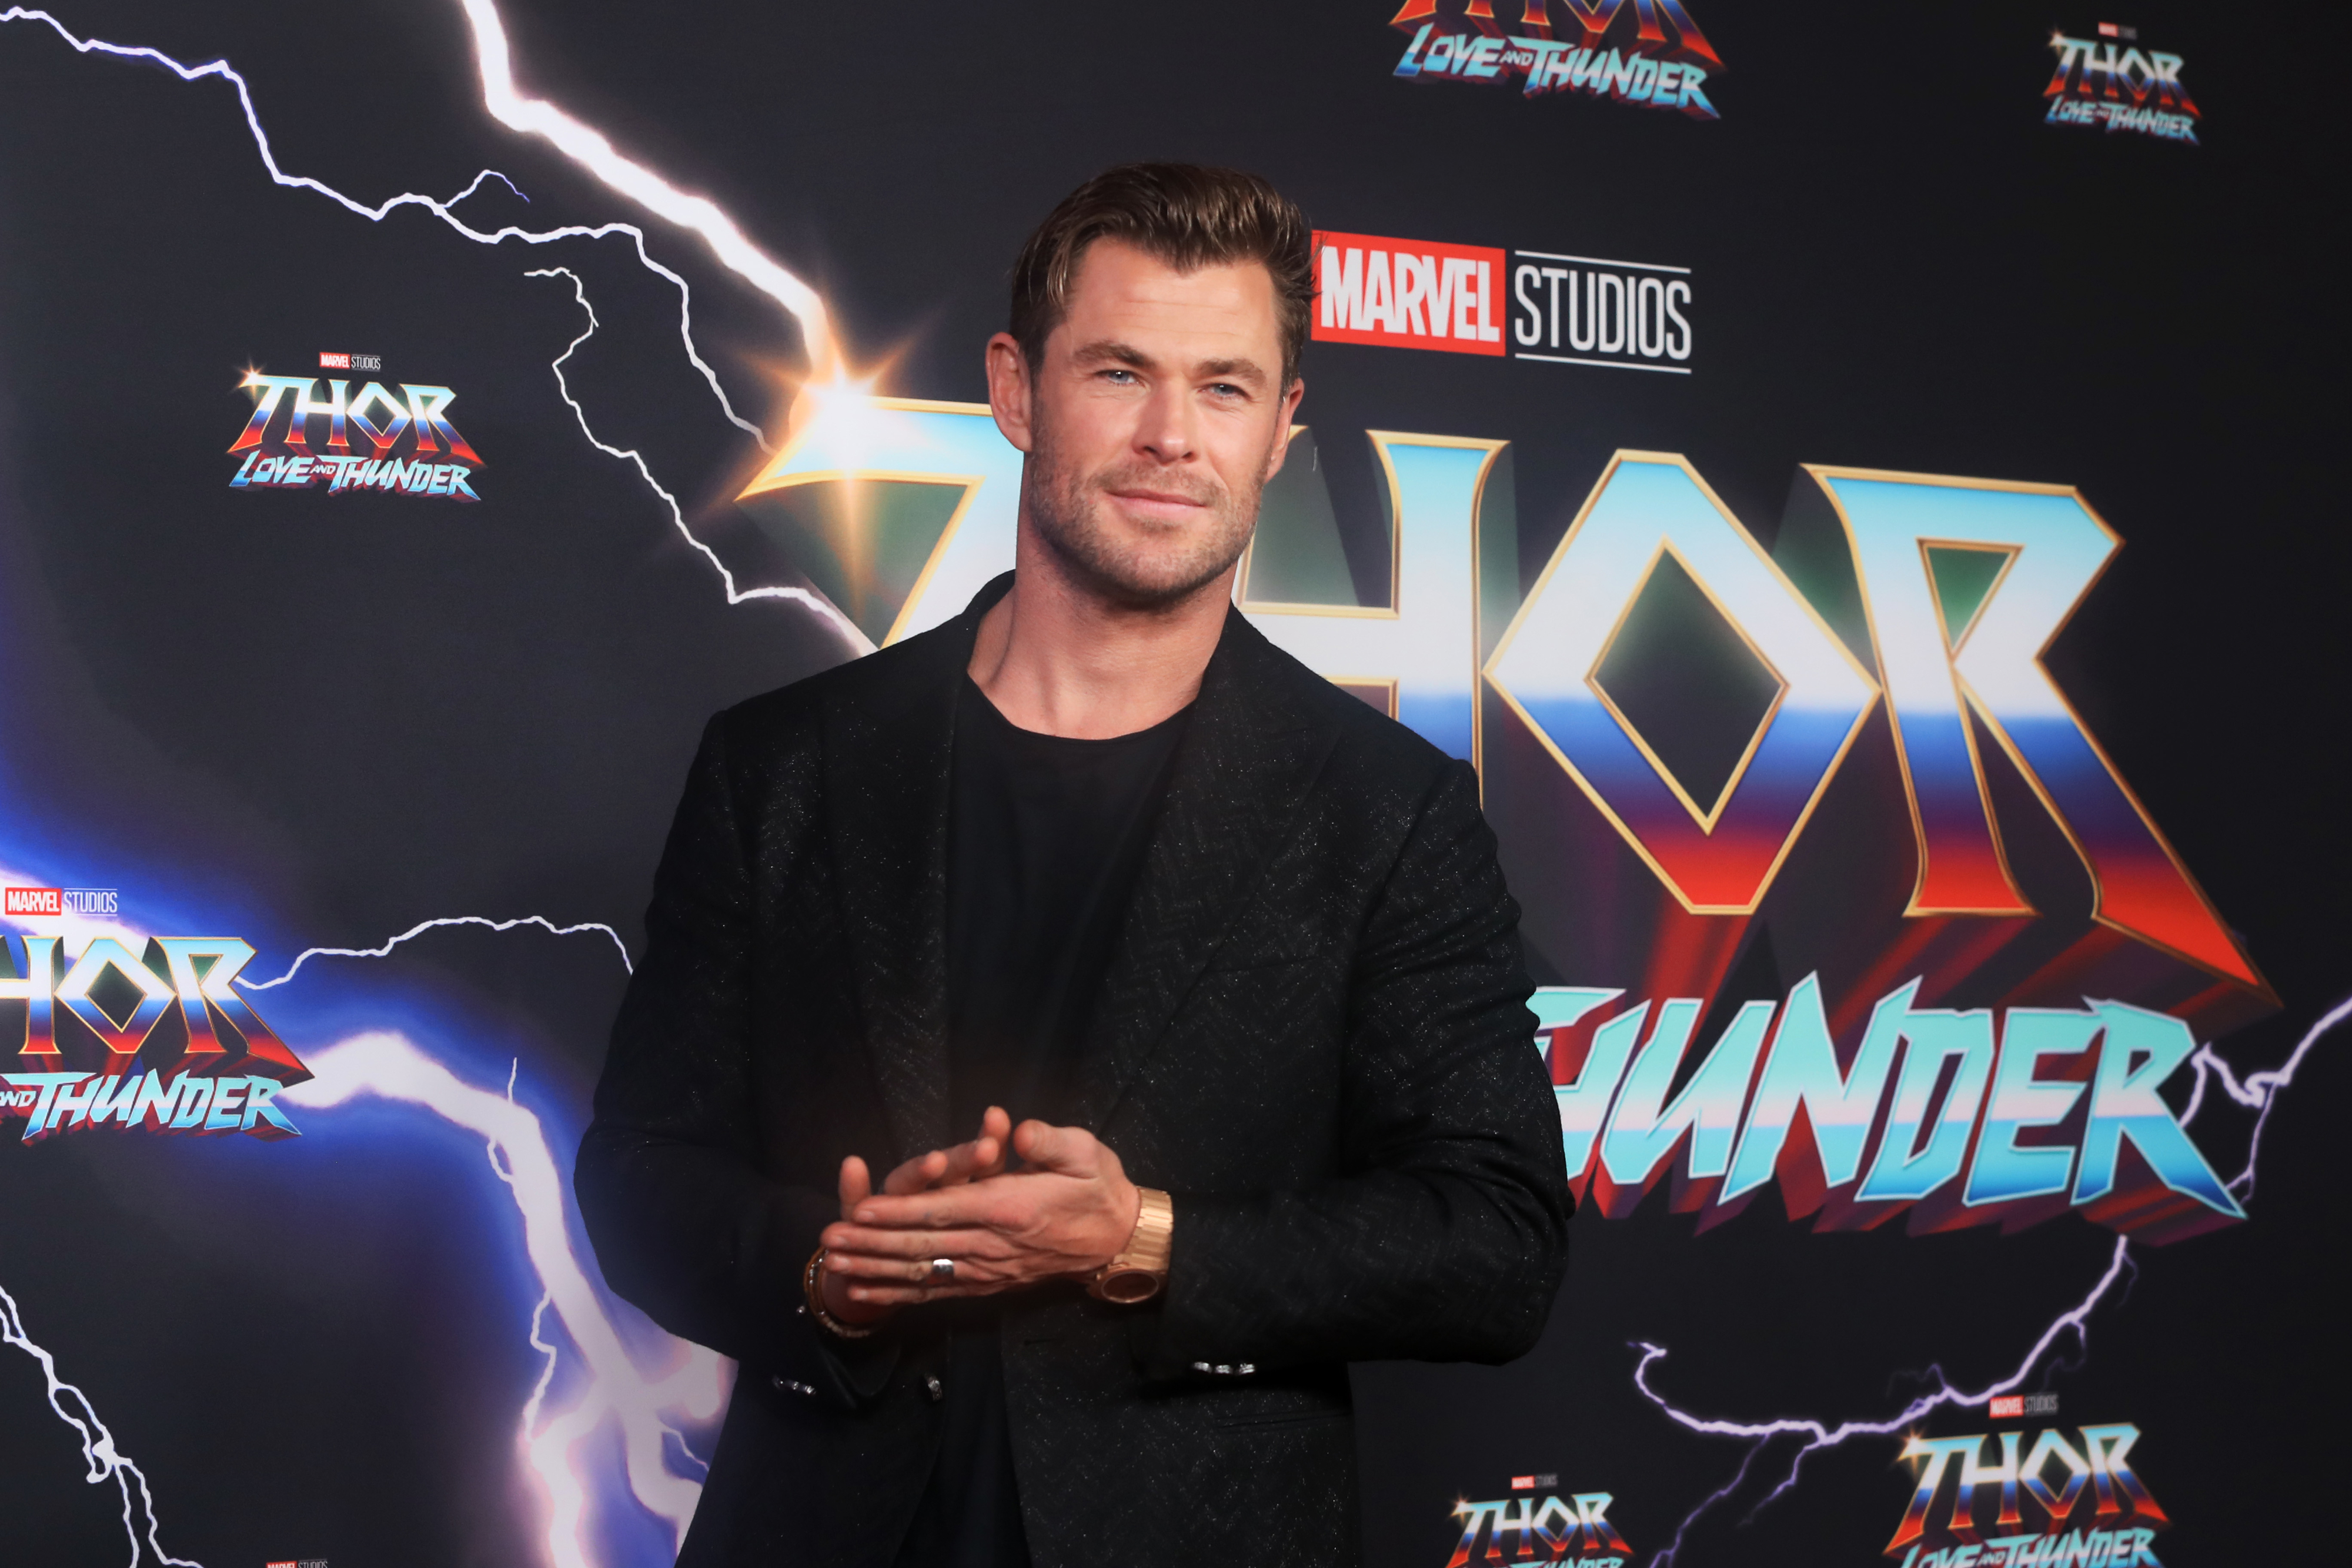 Chris Hemsworth poses at a Thor: Love and Thunder event in a black patterned suit with arms crossed